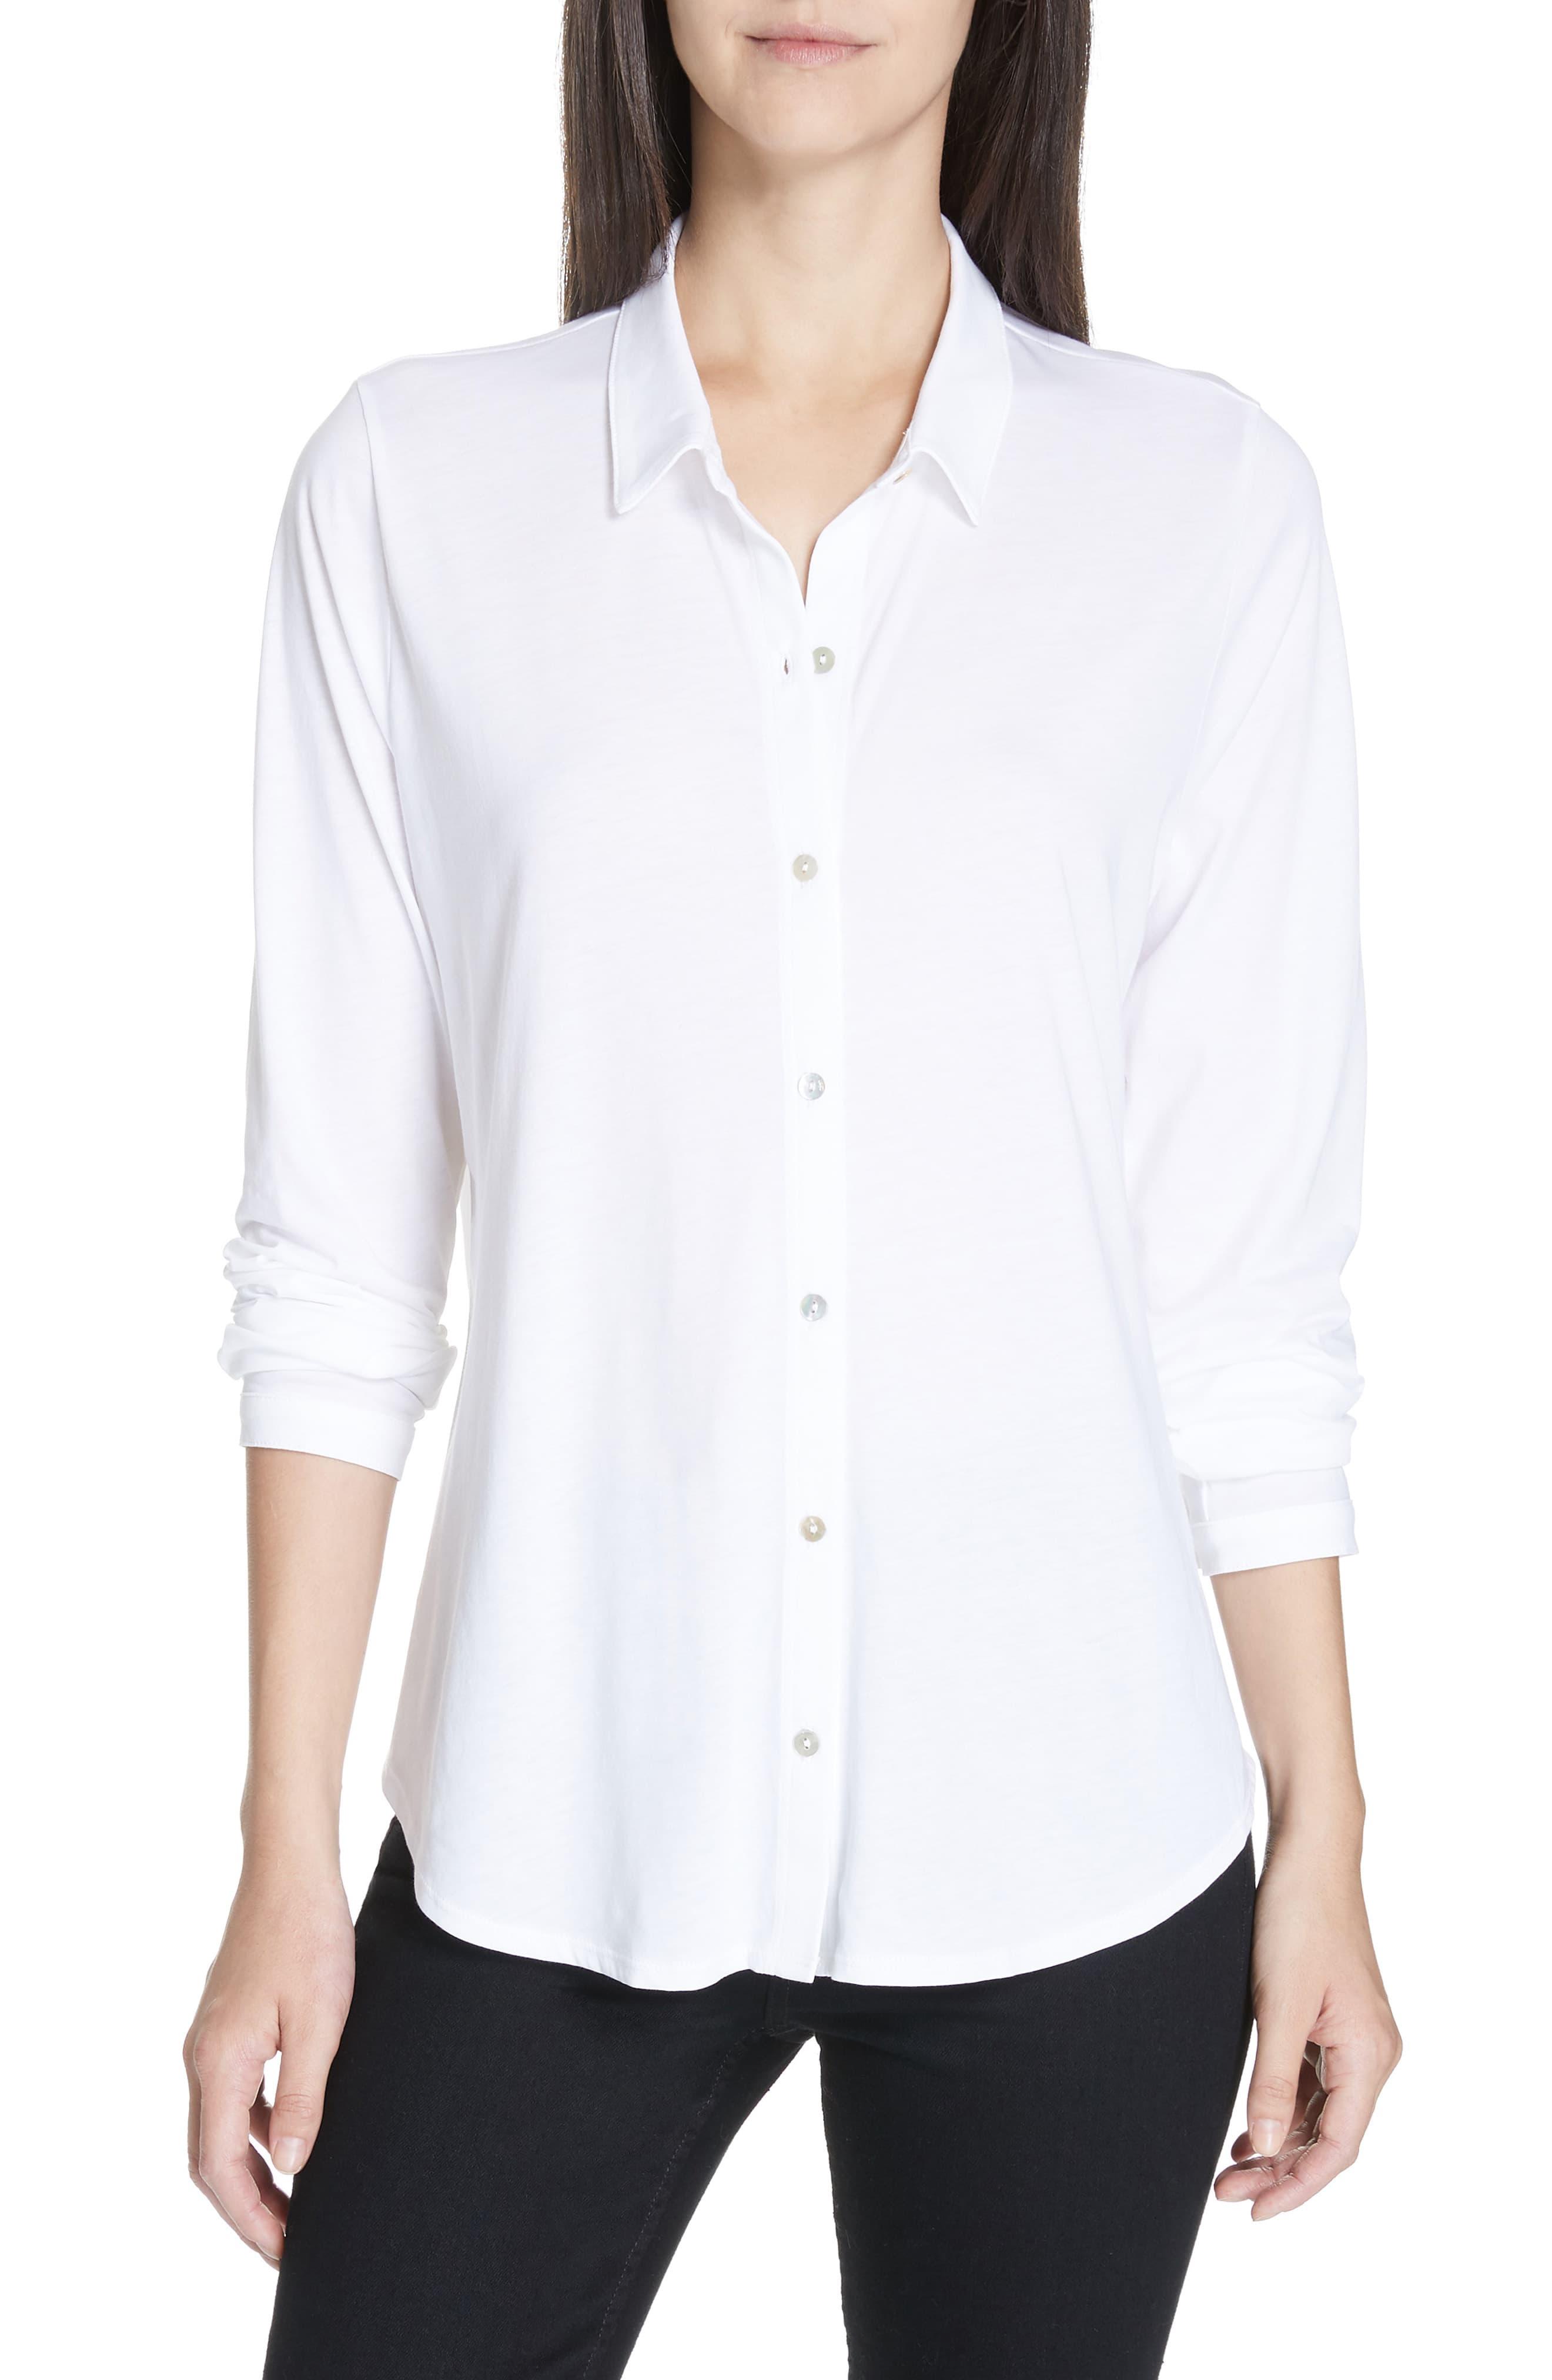 Eileen Fisher Organic Cotton Jersey Classic Collar Shirt in White - Lyst